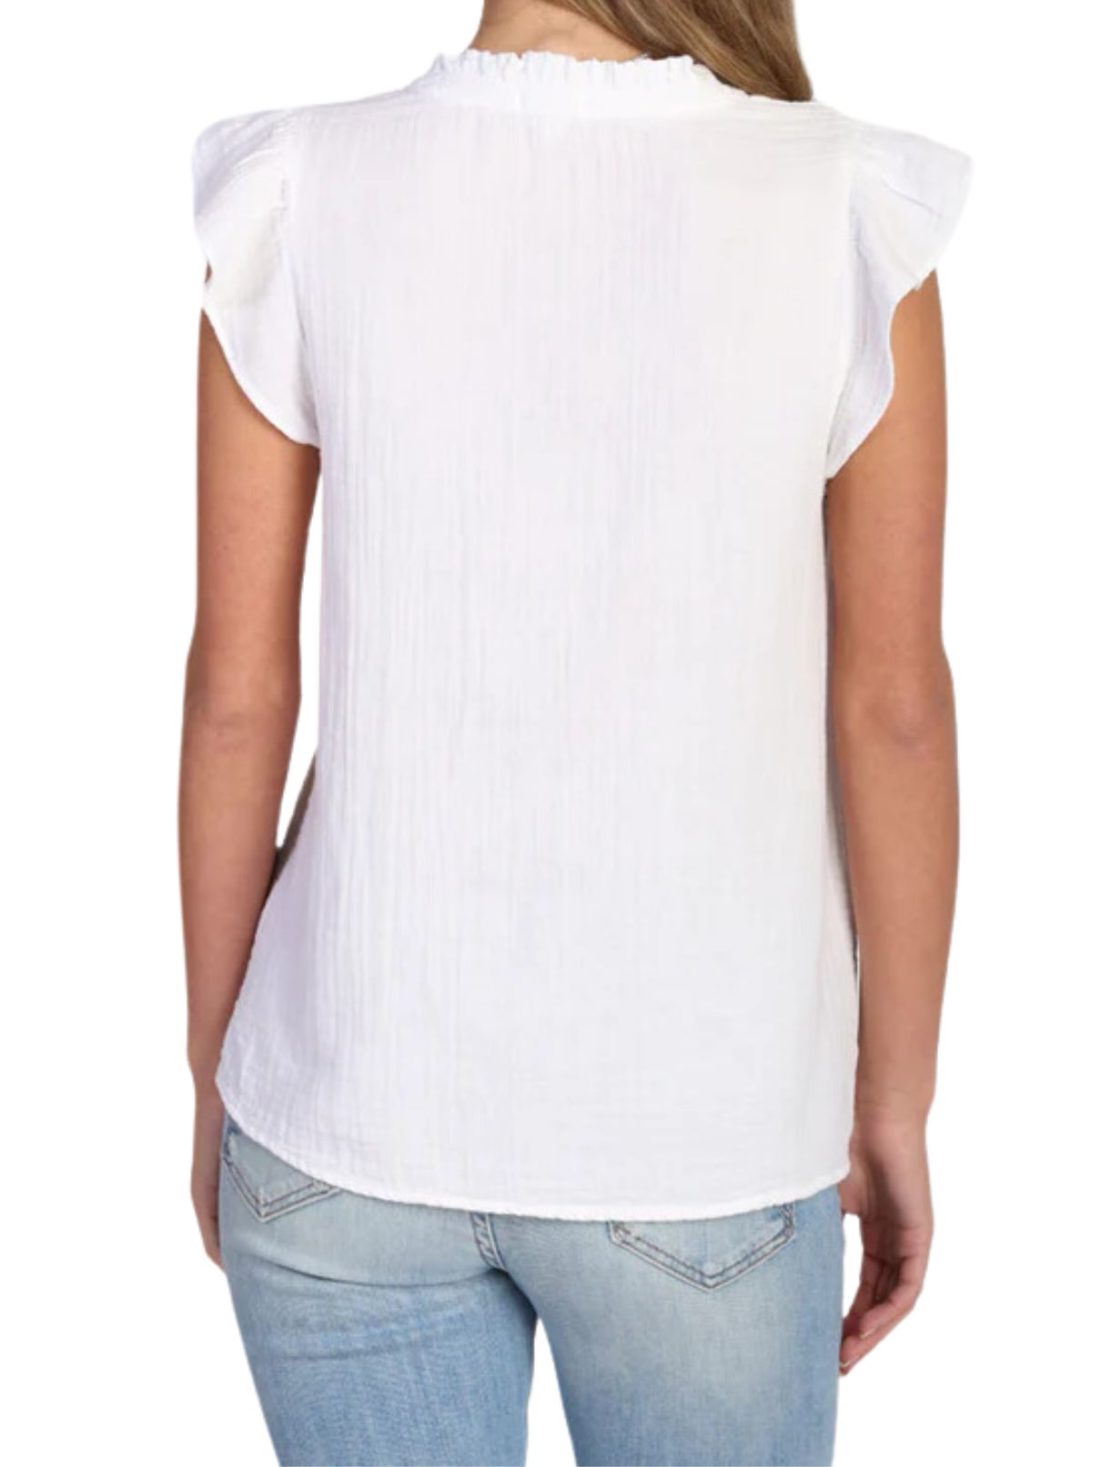 dylan gracie top in white